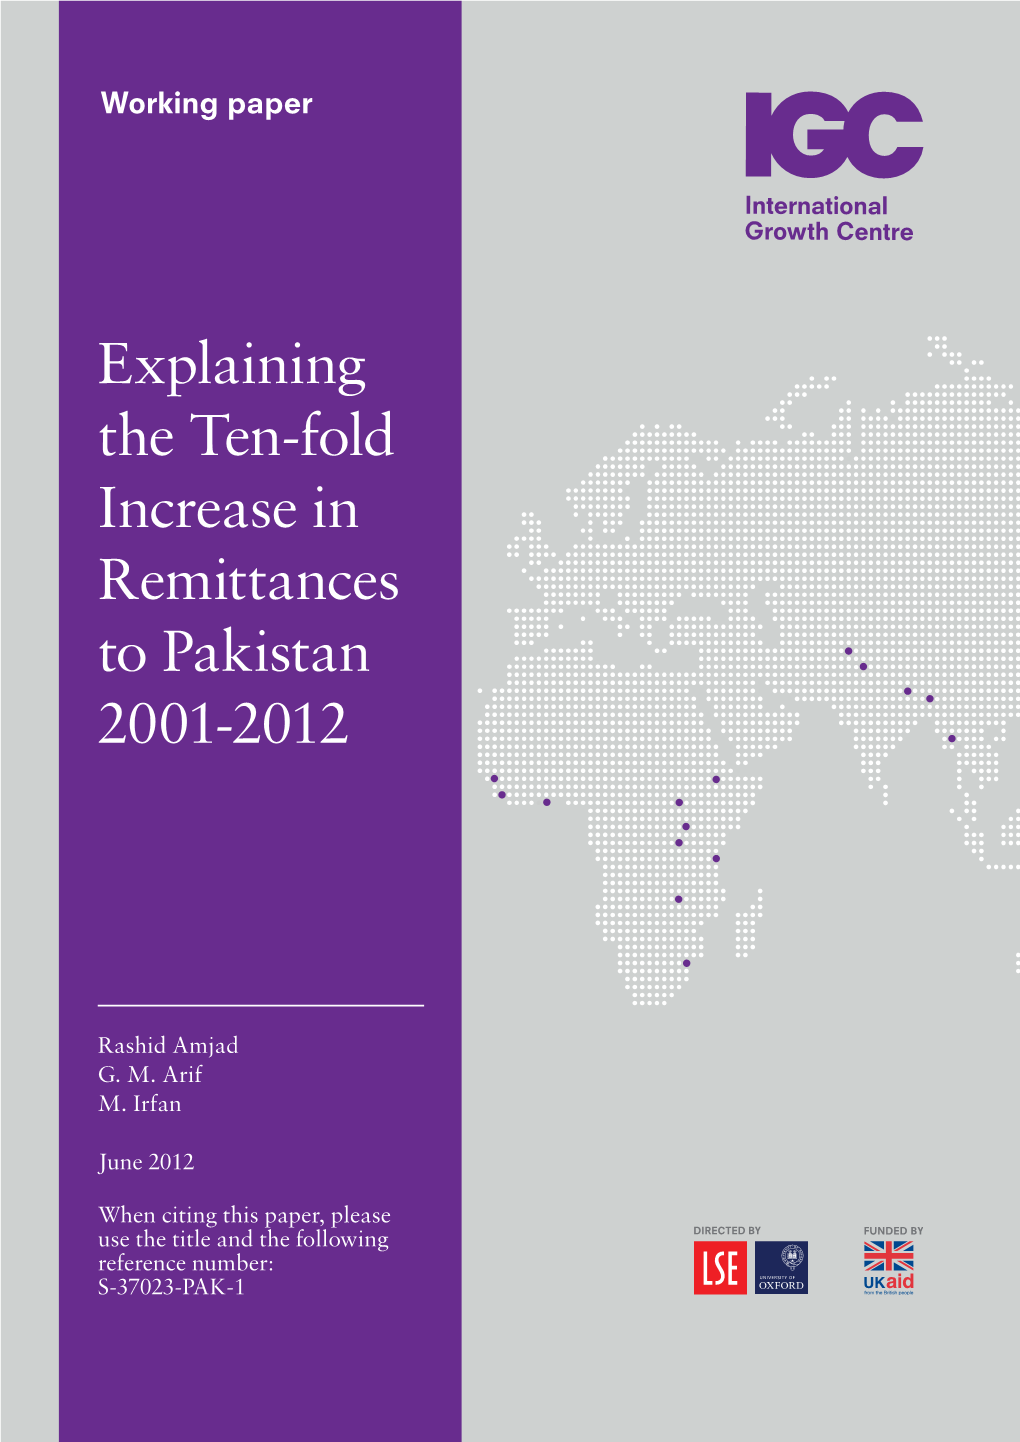 Explaining the Ten-Fold Increase in Remittances to Pakistan 2001-2012